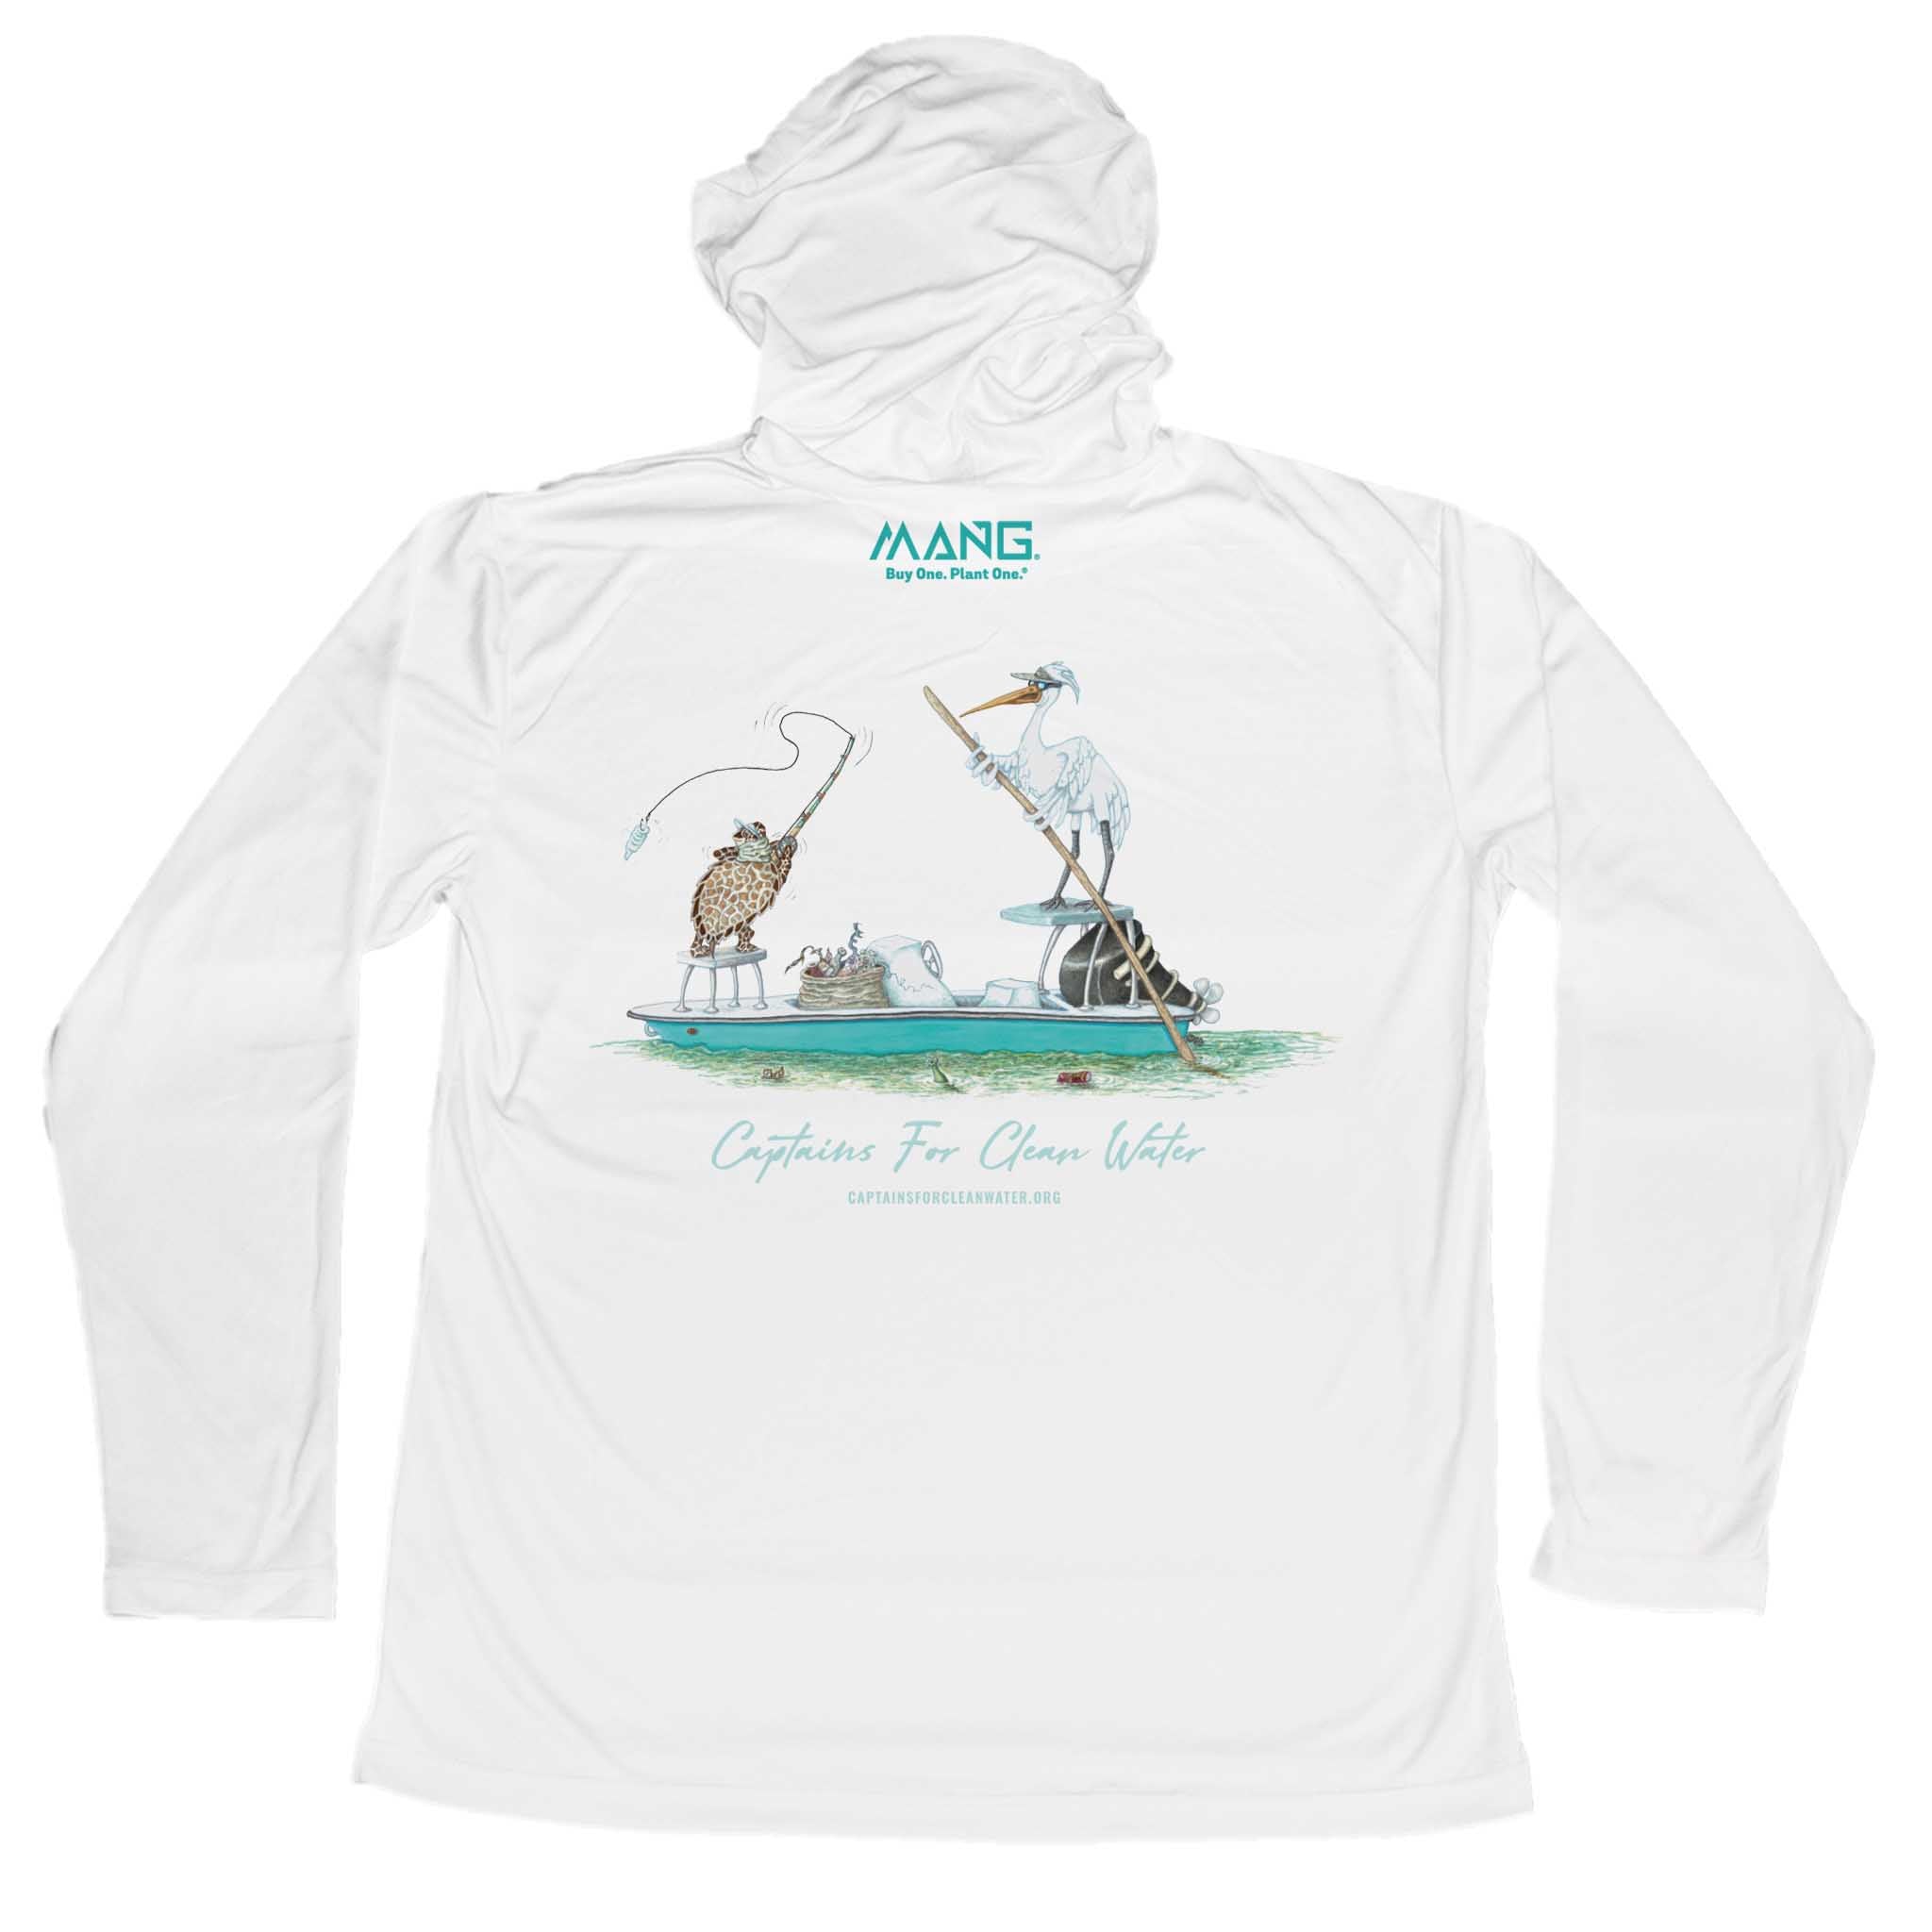 MANG Captain Cleanwater - Youth - Hoodie - YXS-White